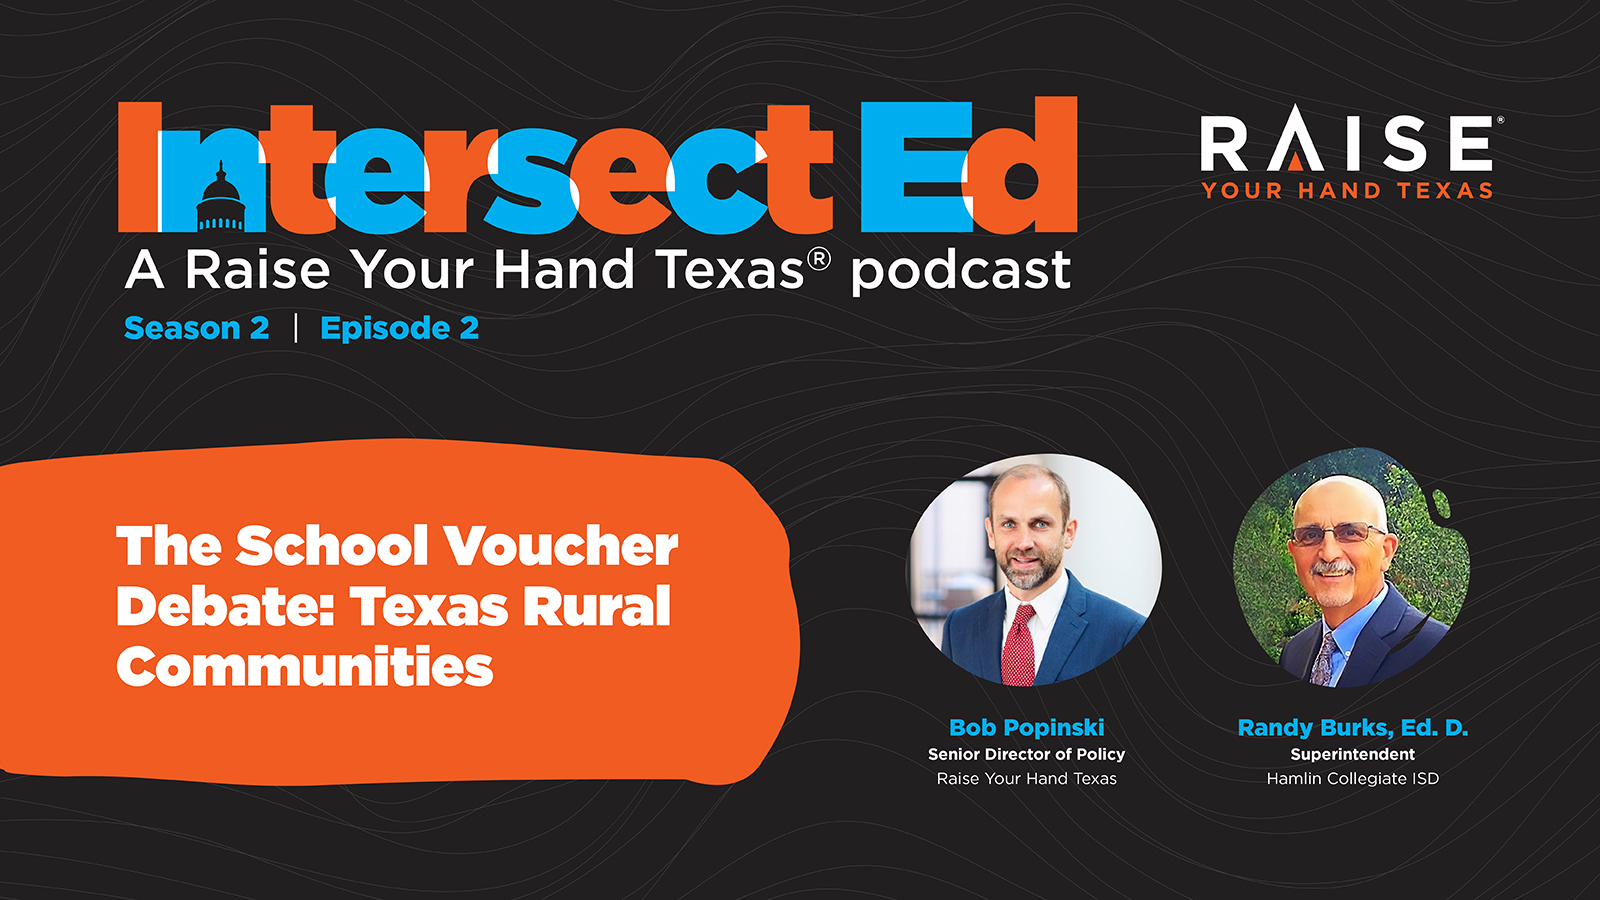 Vouchers and Education Savings Accounts - what do they mean for Texas?